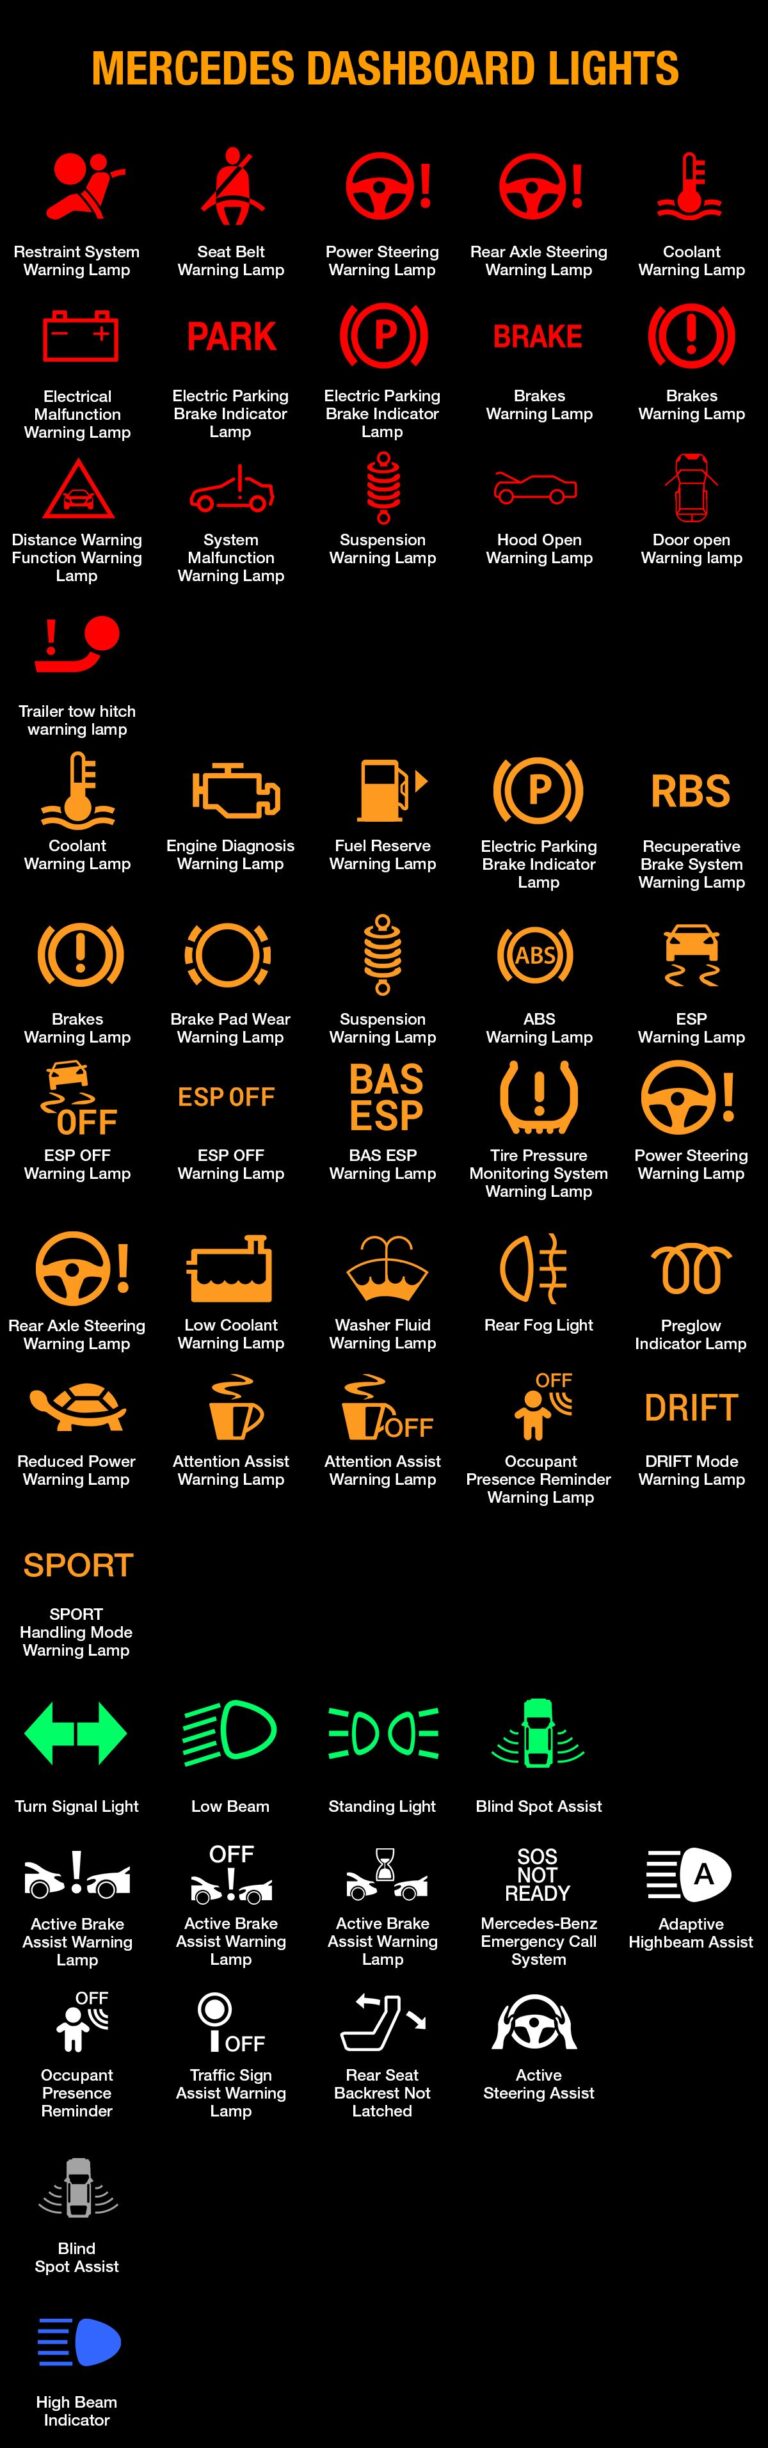 Mercedes-Benz Warning Lights and Meaning